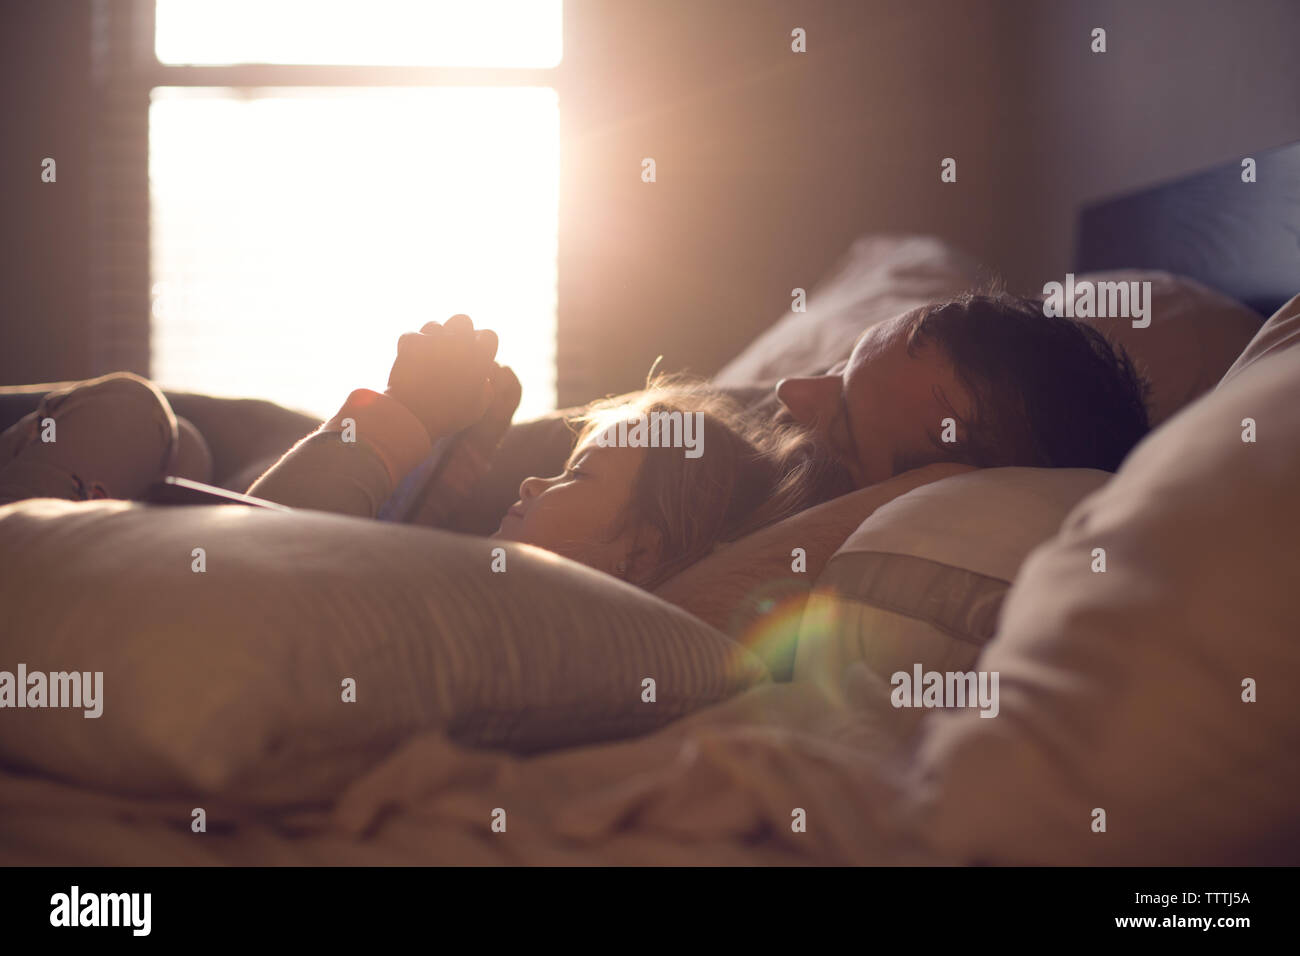 Parent and child share a lazy morning in beautiful, dreamy light. Stock Photo